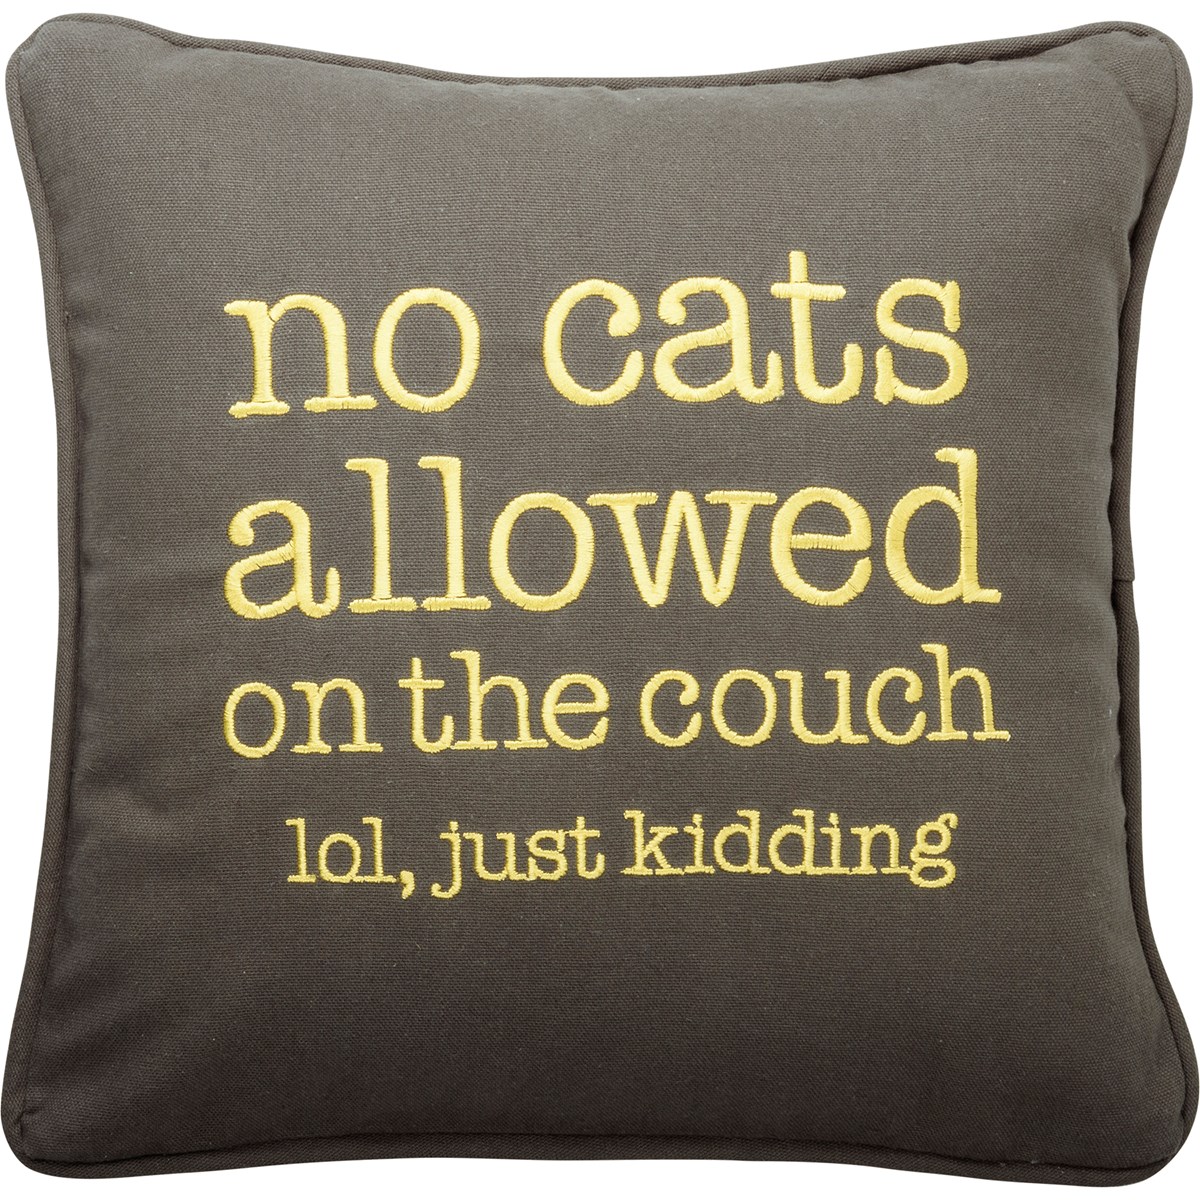 Pillow - No Cats On The Couch LOL Just Kidding - 12" x 12" - Cotton, Zipper